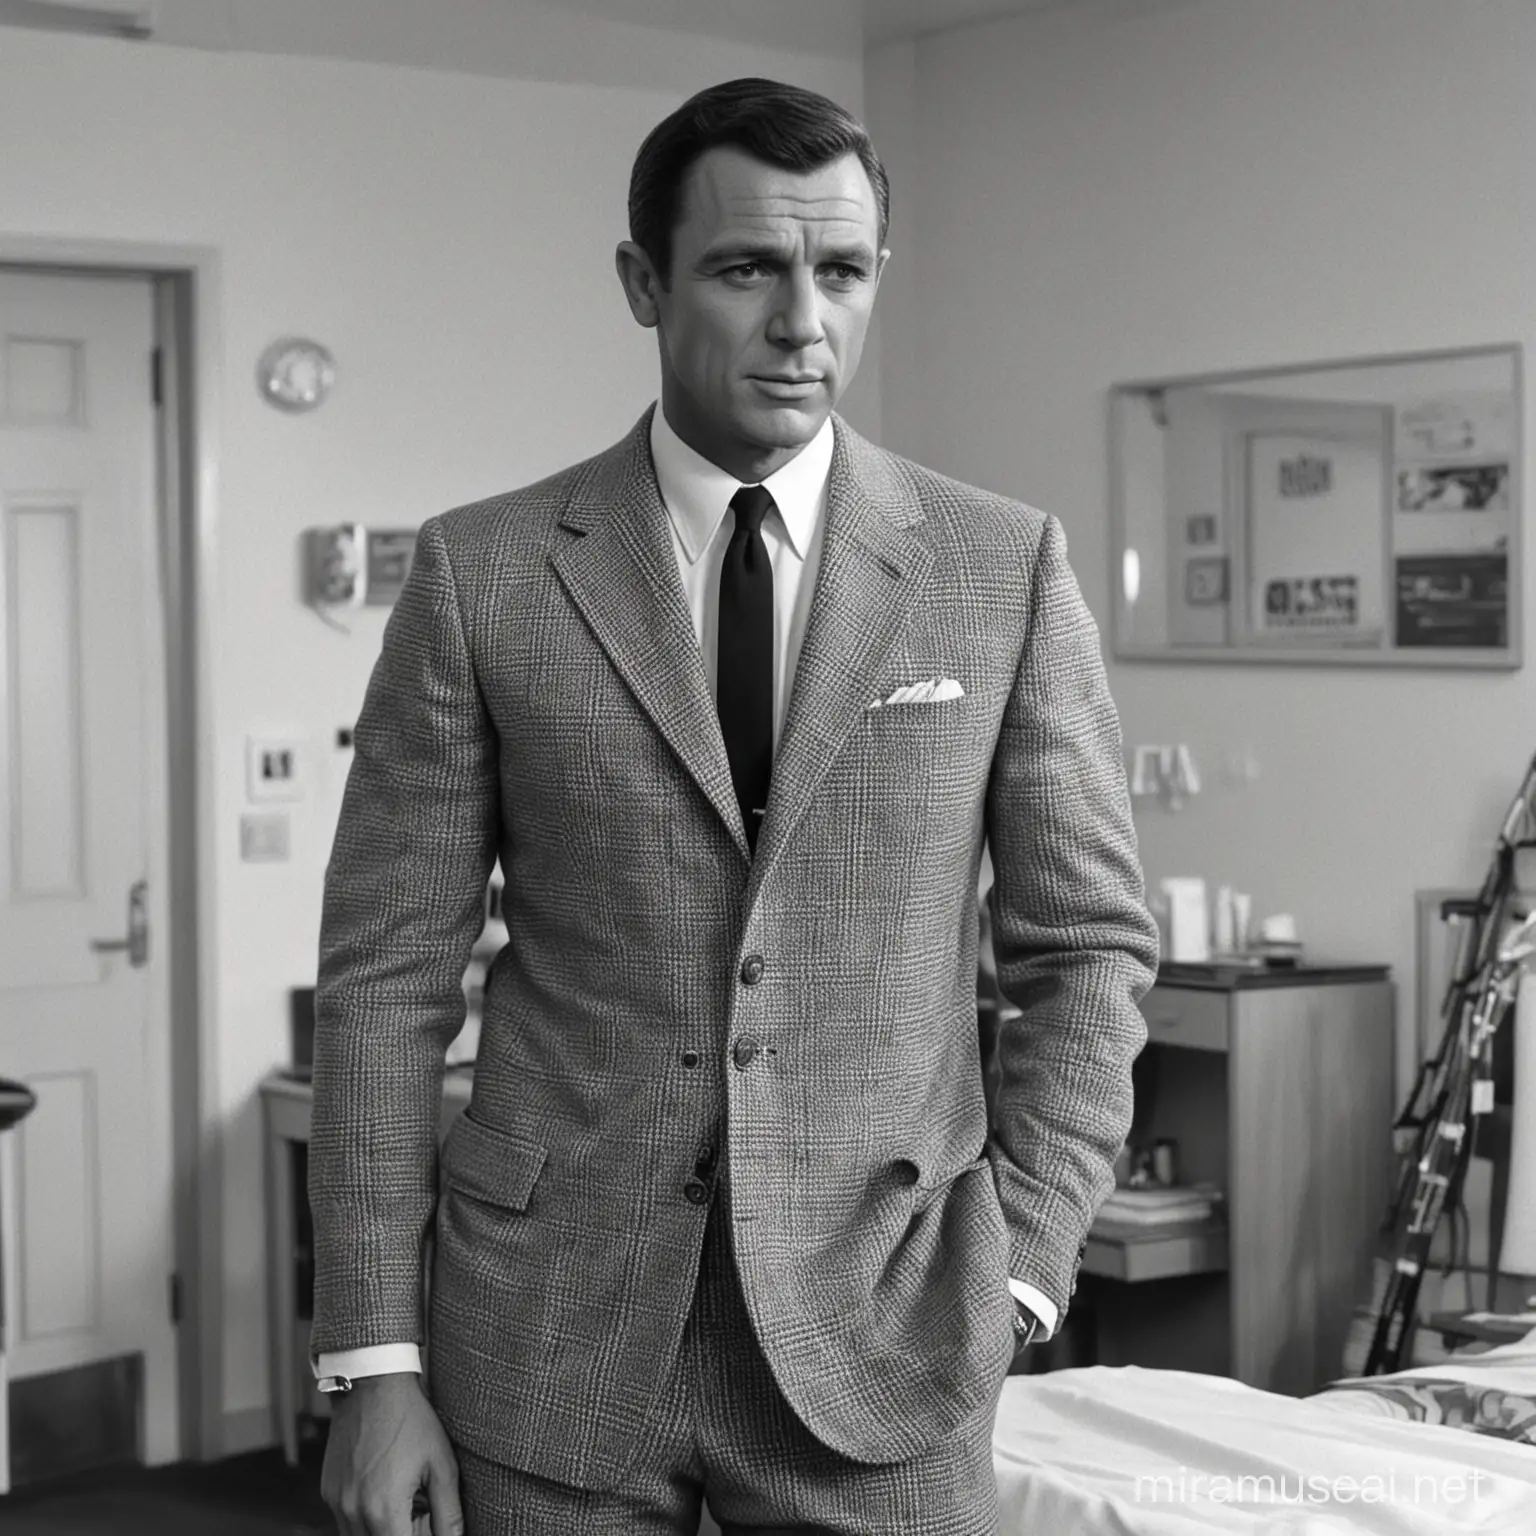 James Bond in shrublands clinic, April 1964. Wearing his black and white houndstooth suit.